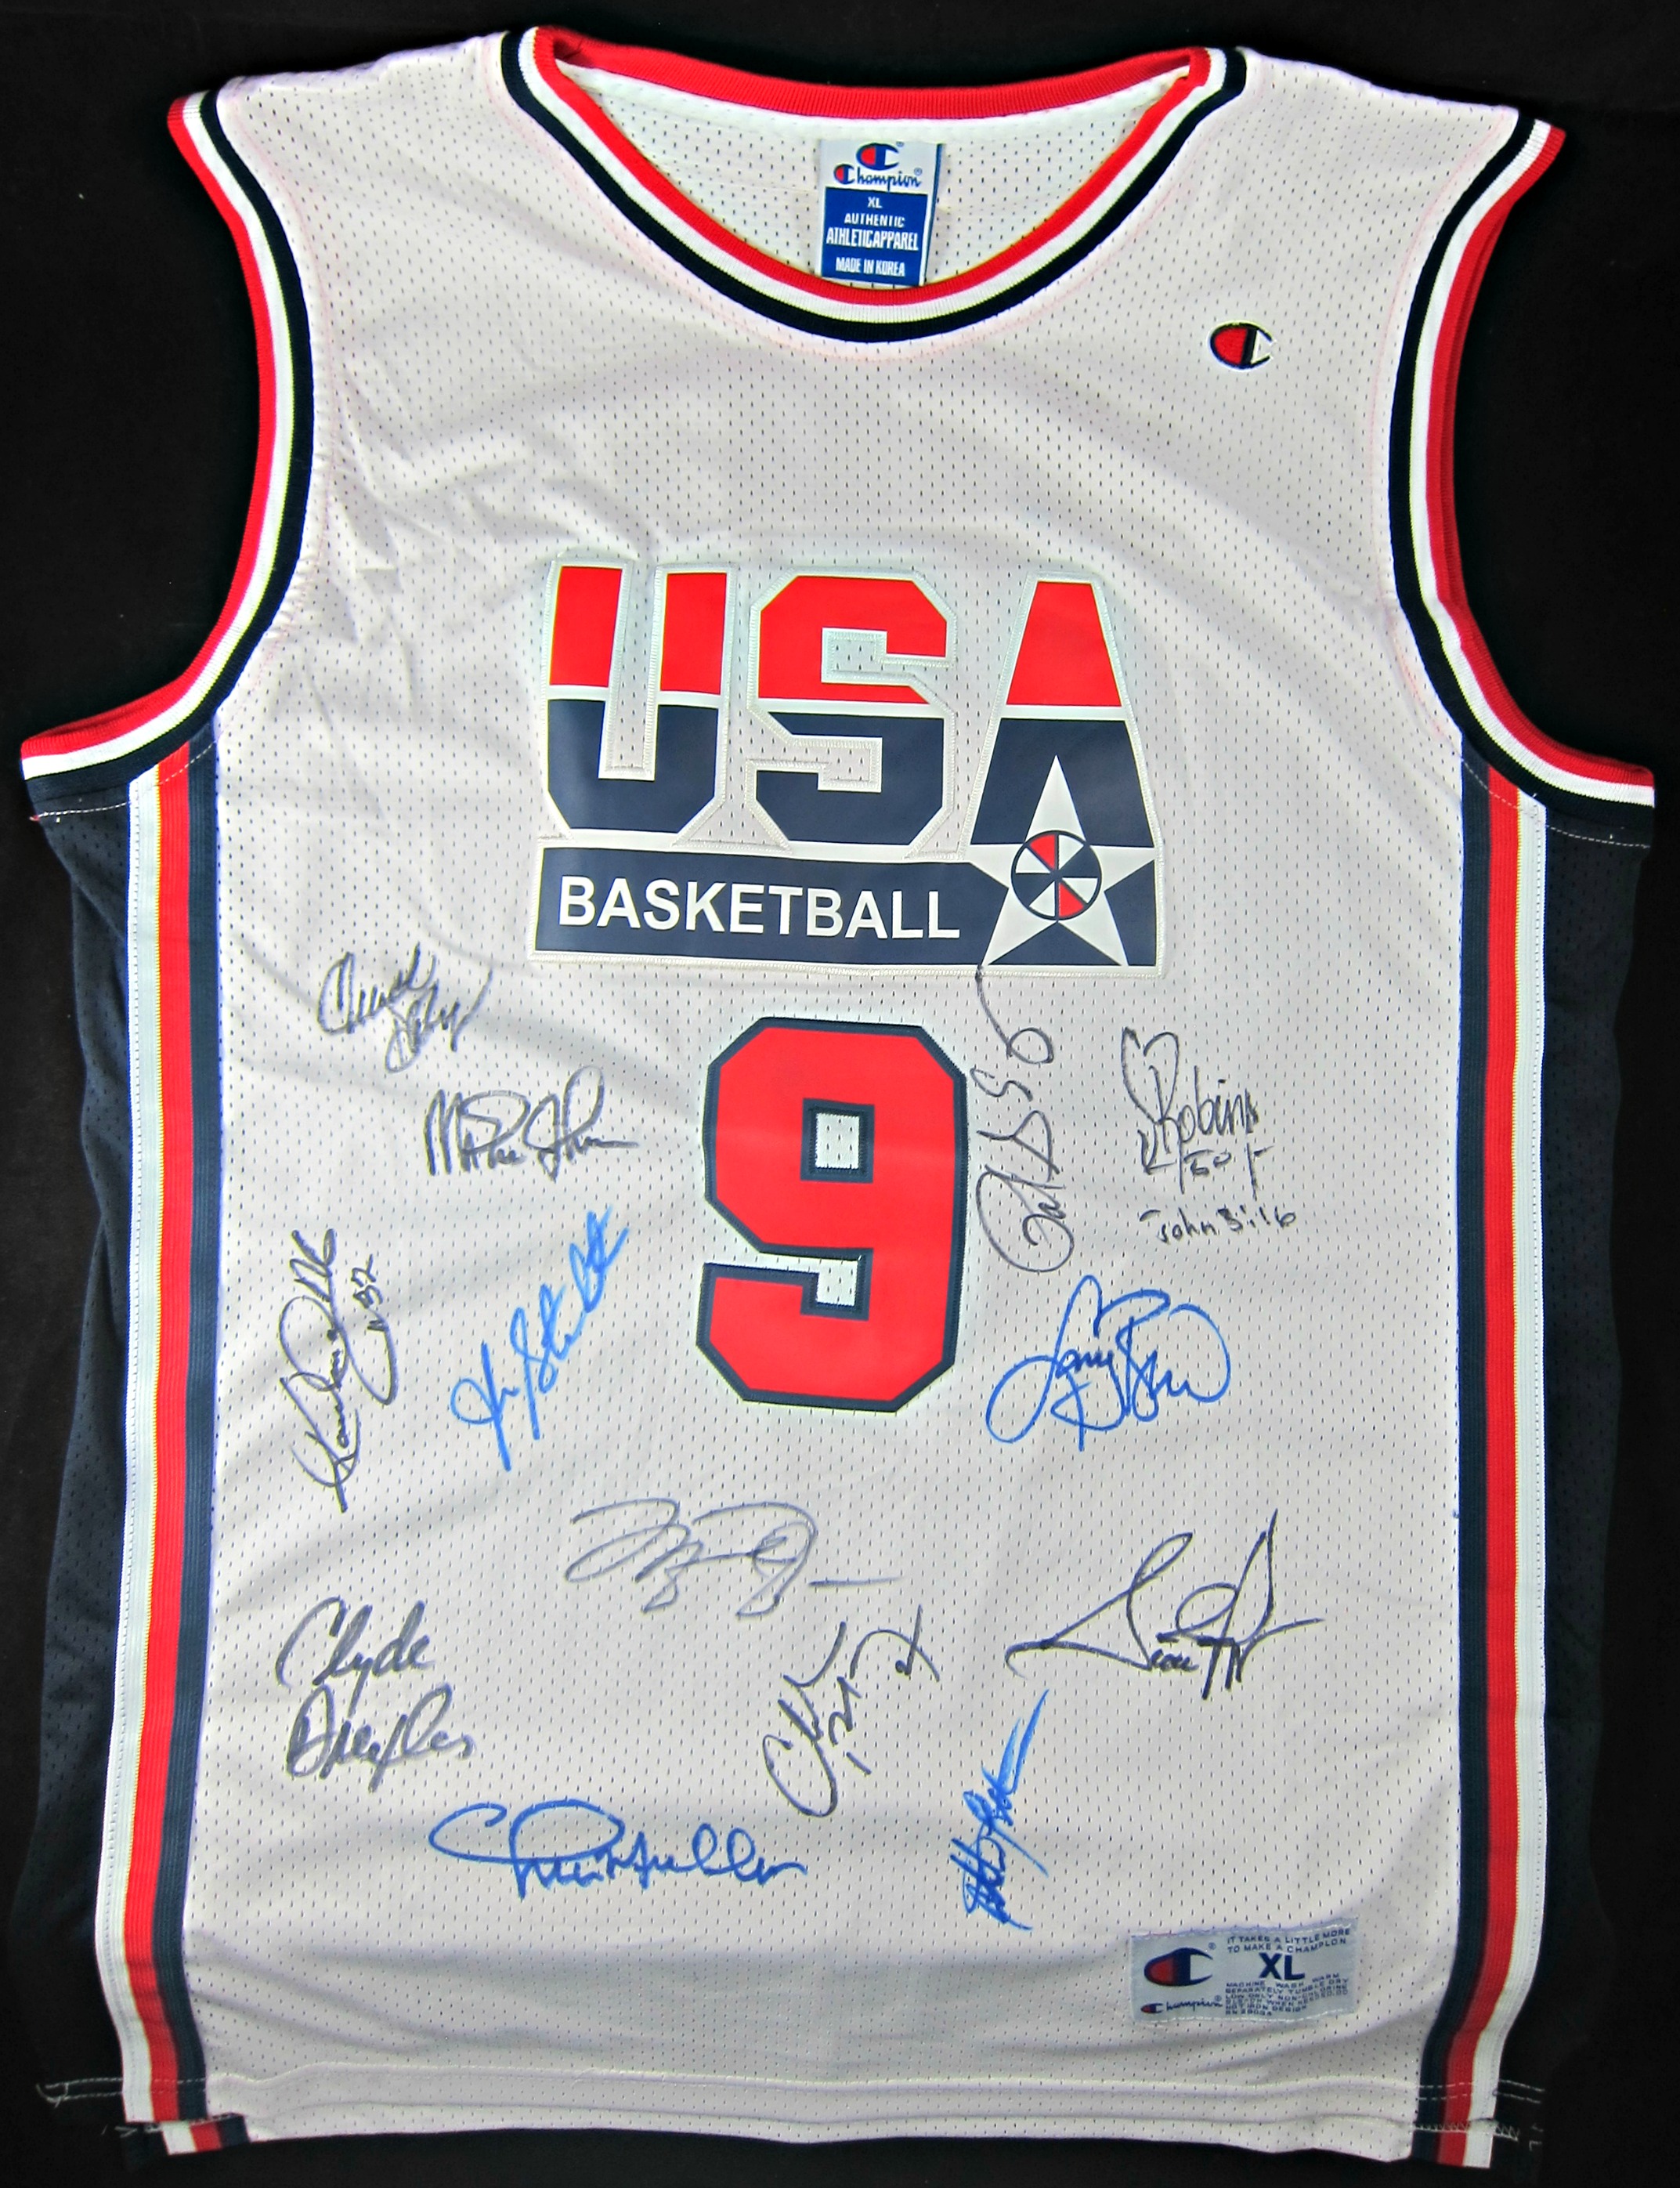 dream team signed jersey